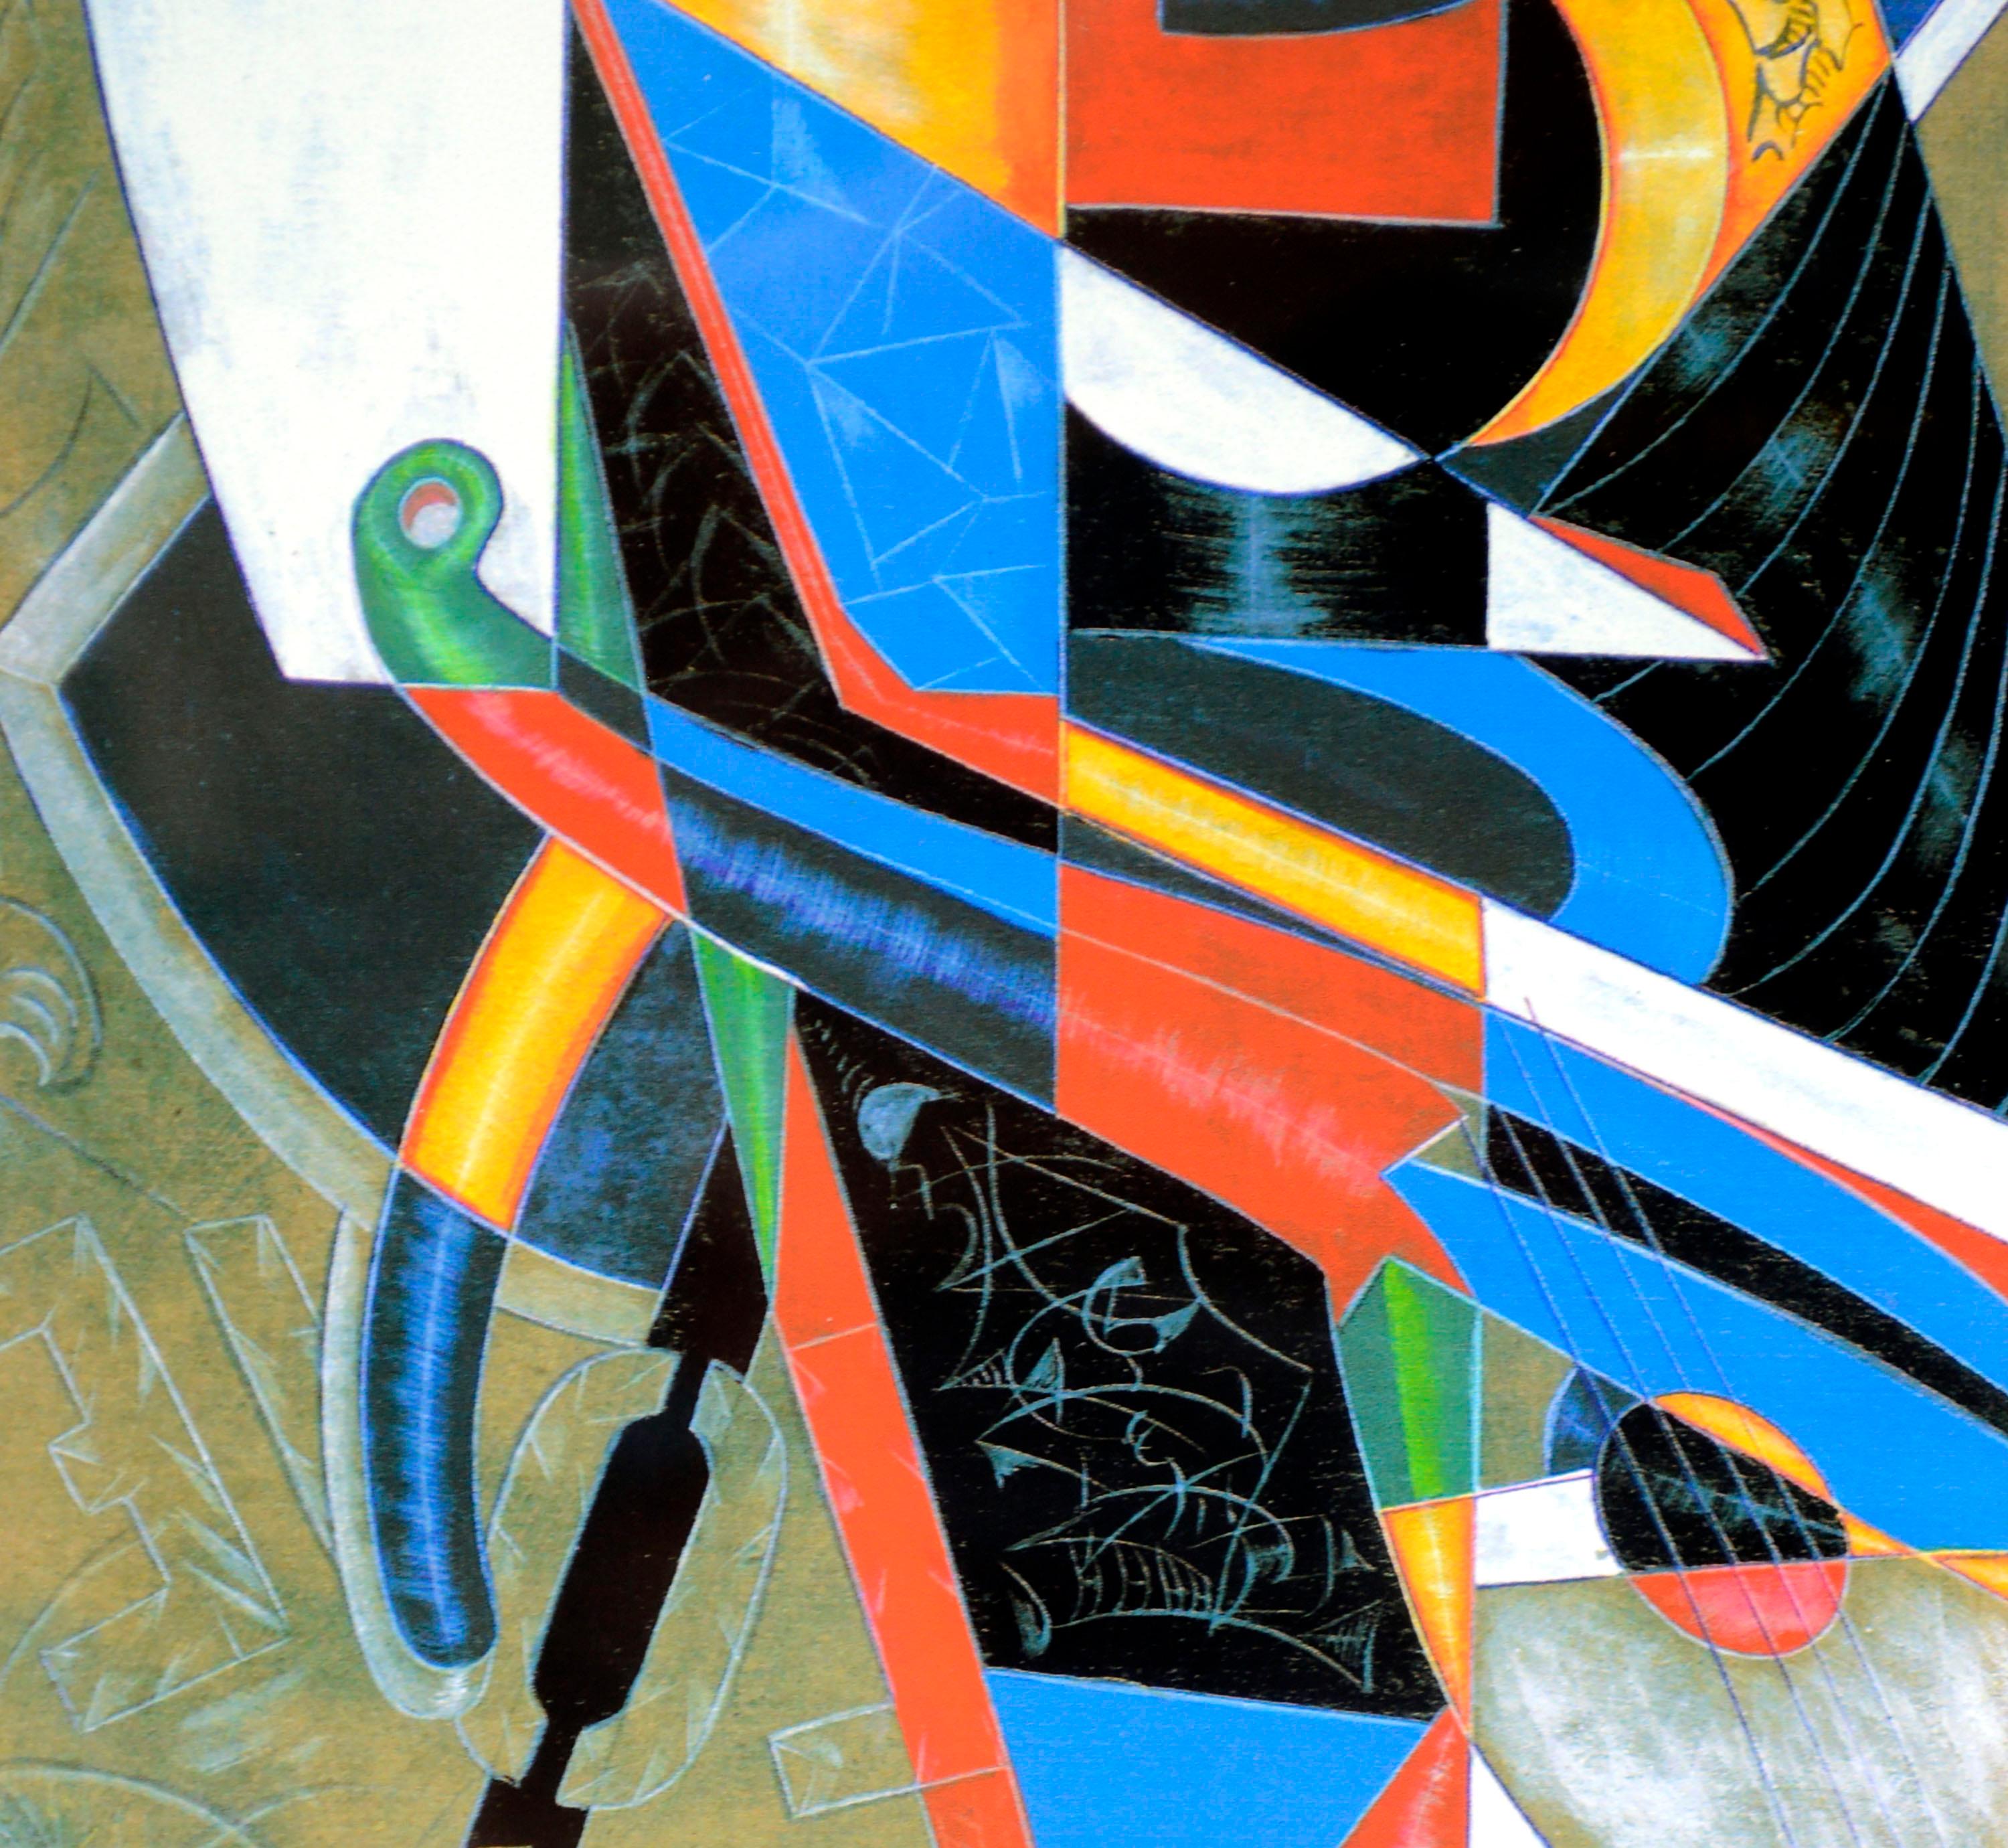 Modern Cubist Abstract in Primary Colors, A/P  by Juan Quevedo 

